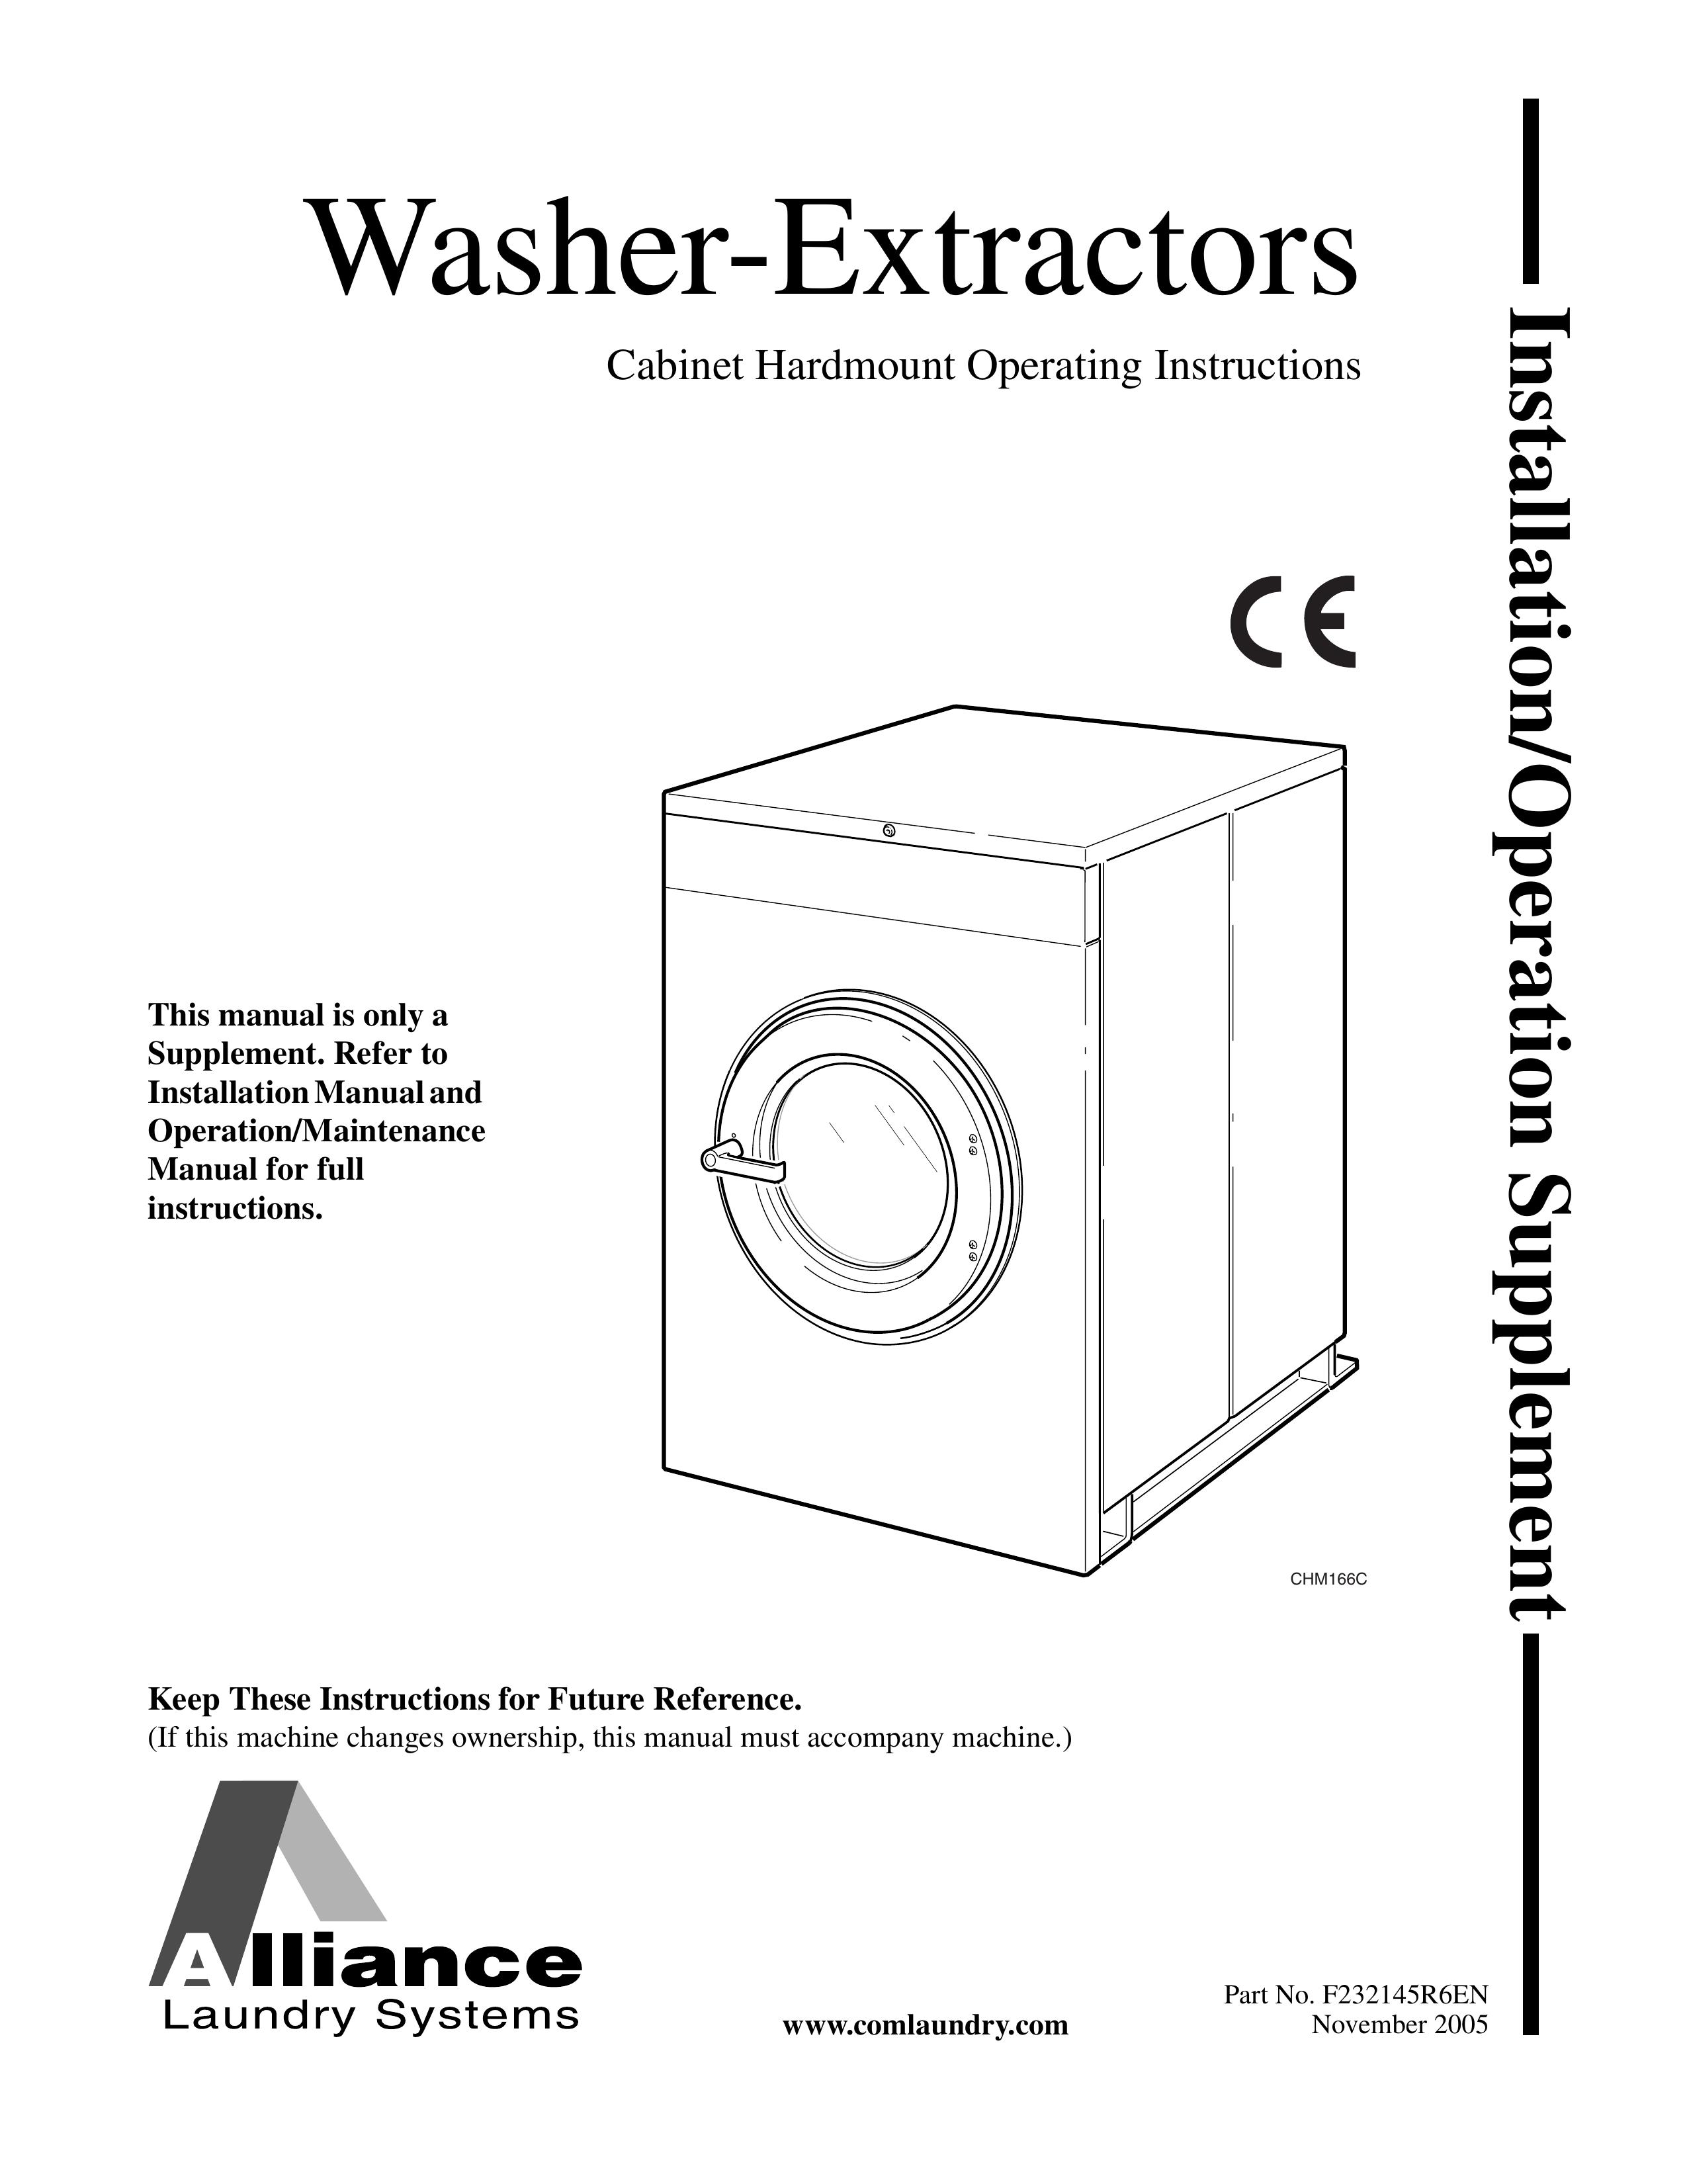 Alliance Laundry Systems CHM166C Washer/Dryer User Manual (Page 1)